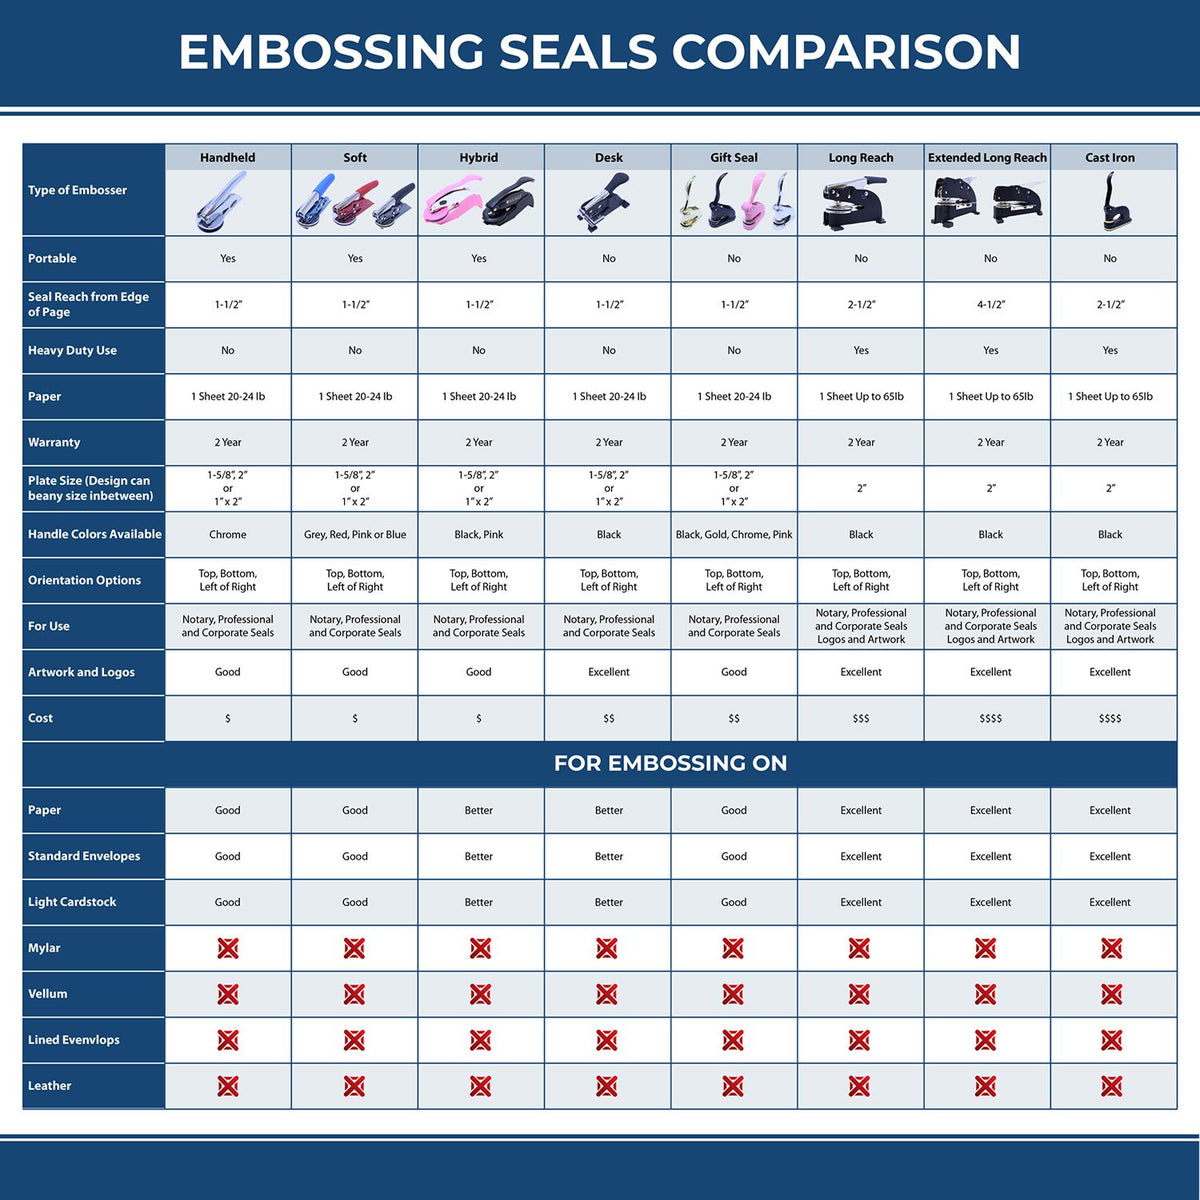 A comparison chart for the different types of mount models available for the State of Kentucky Soft Land Surveyor Embossing Seal.